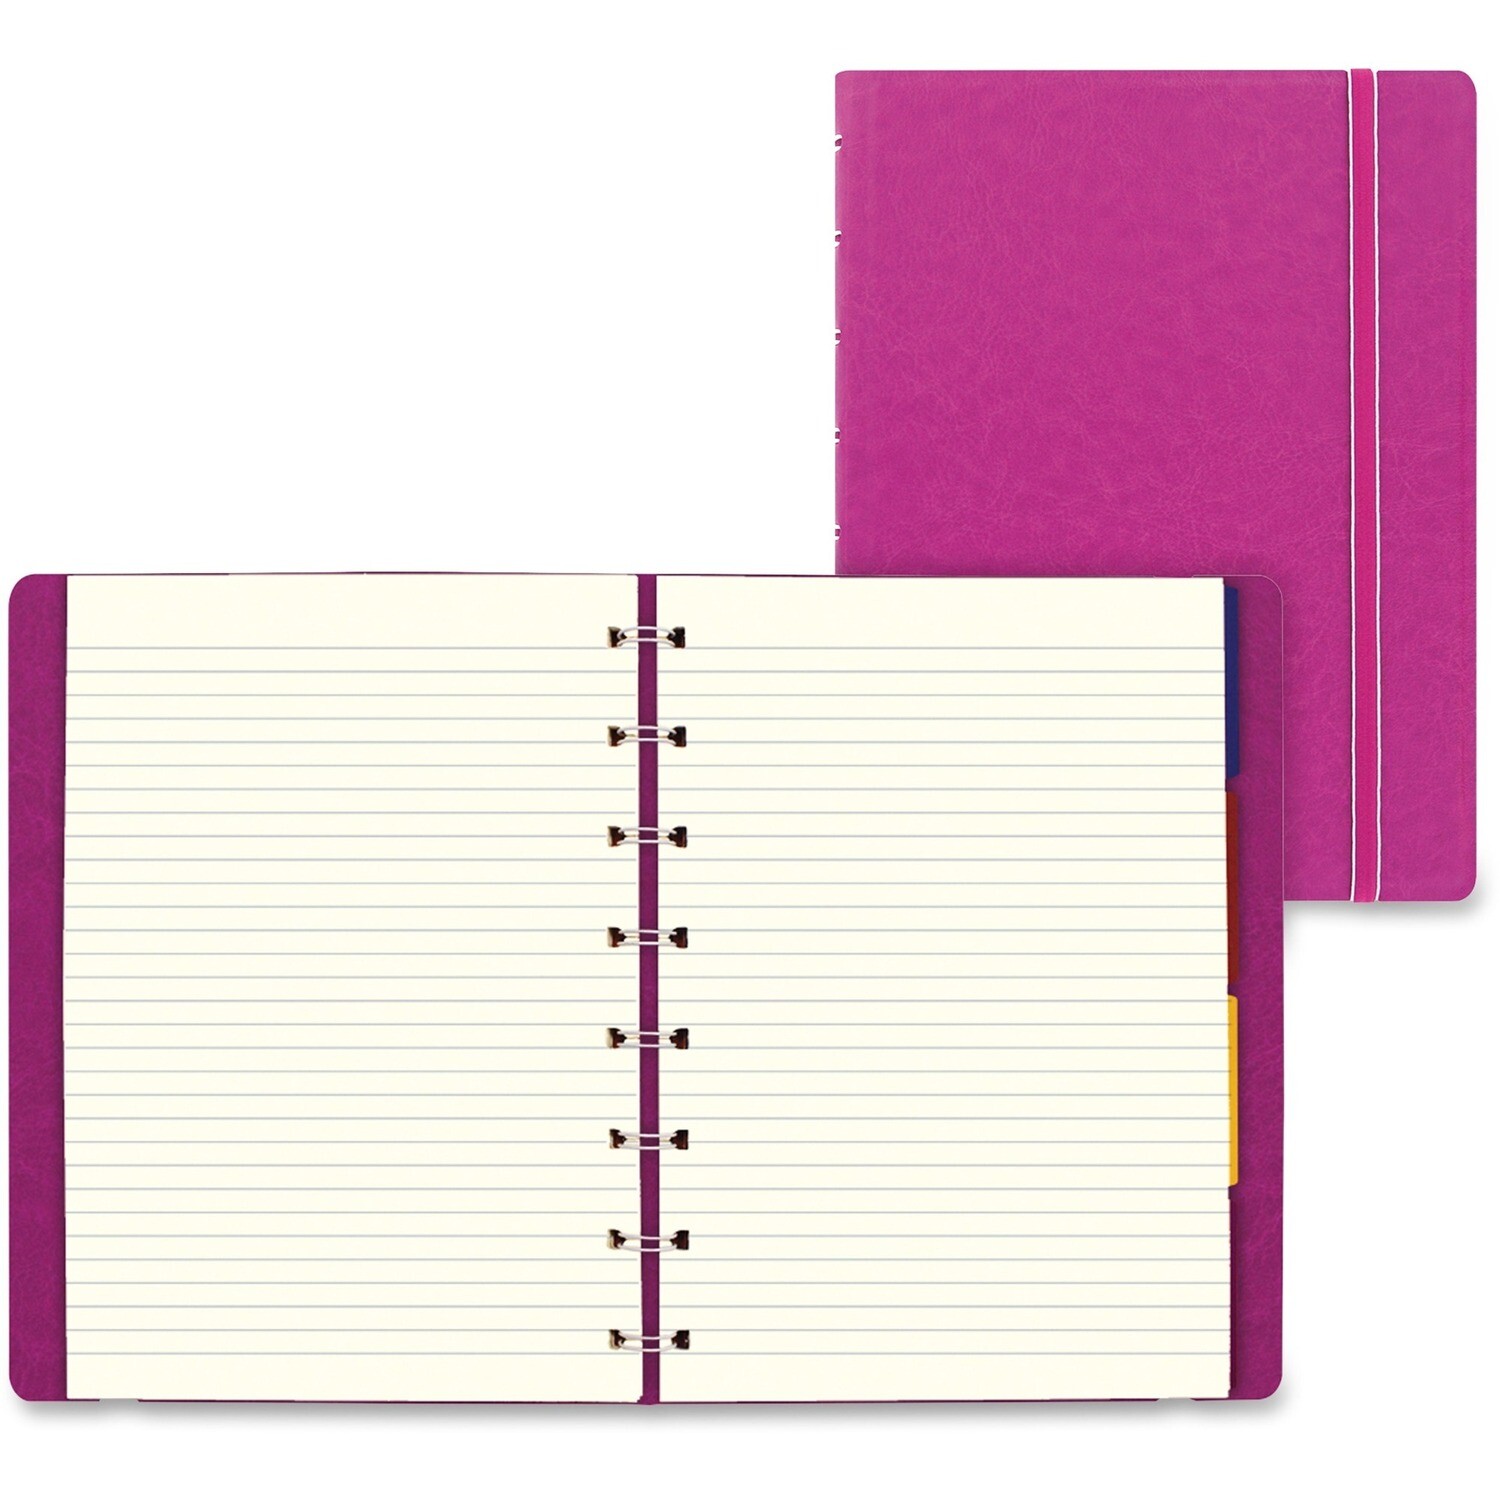 Notebook, Lined, A5 Fuchsia, 112 Pages, Filofax